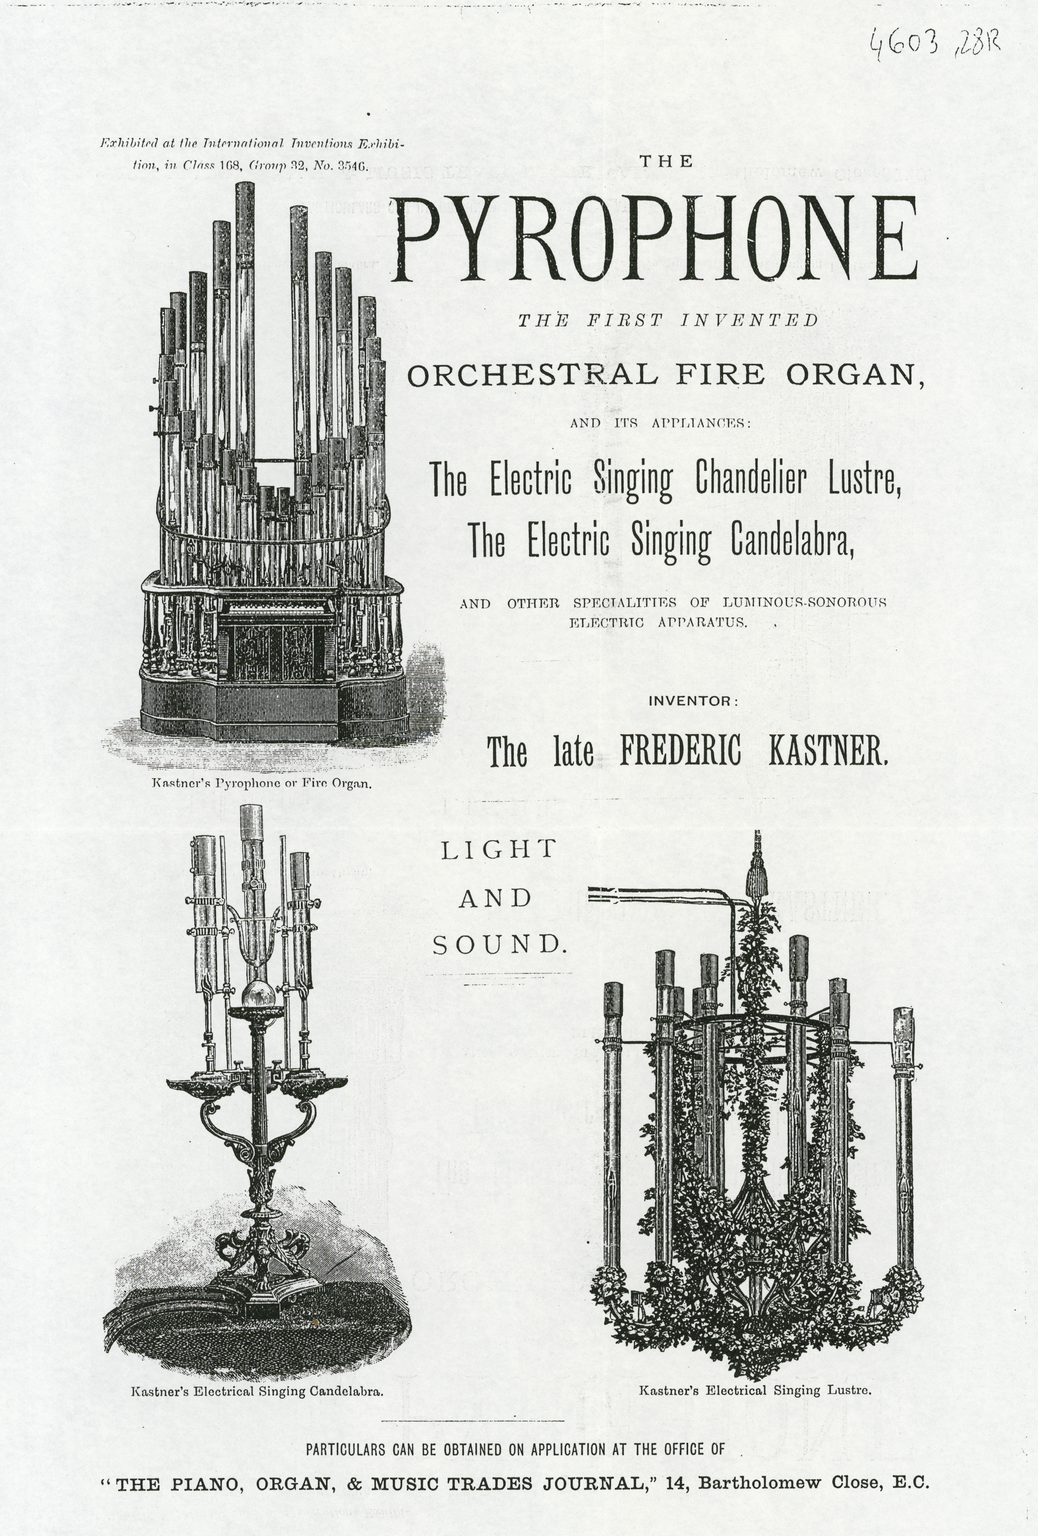 Poster advertising the Orchestral Fire Organ, Electric Singing Chandelier Lustre and Electric Singing Candelabra. (Science Museum, London)